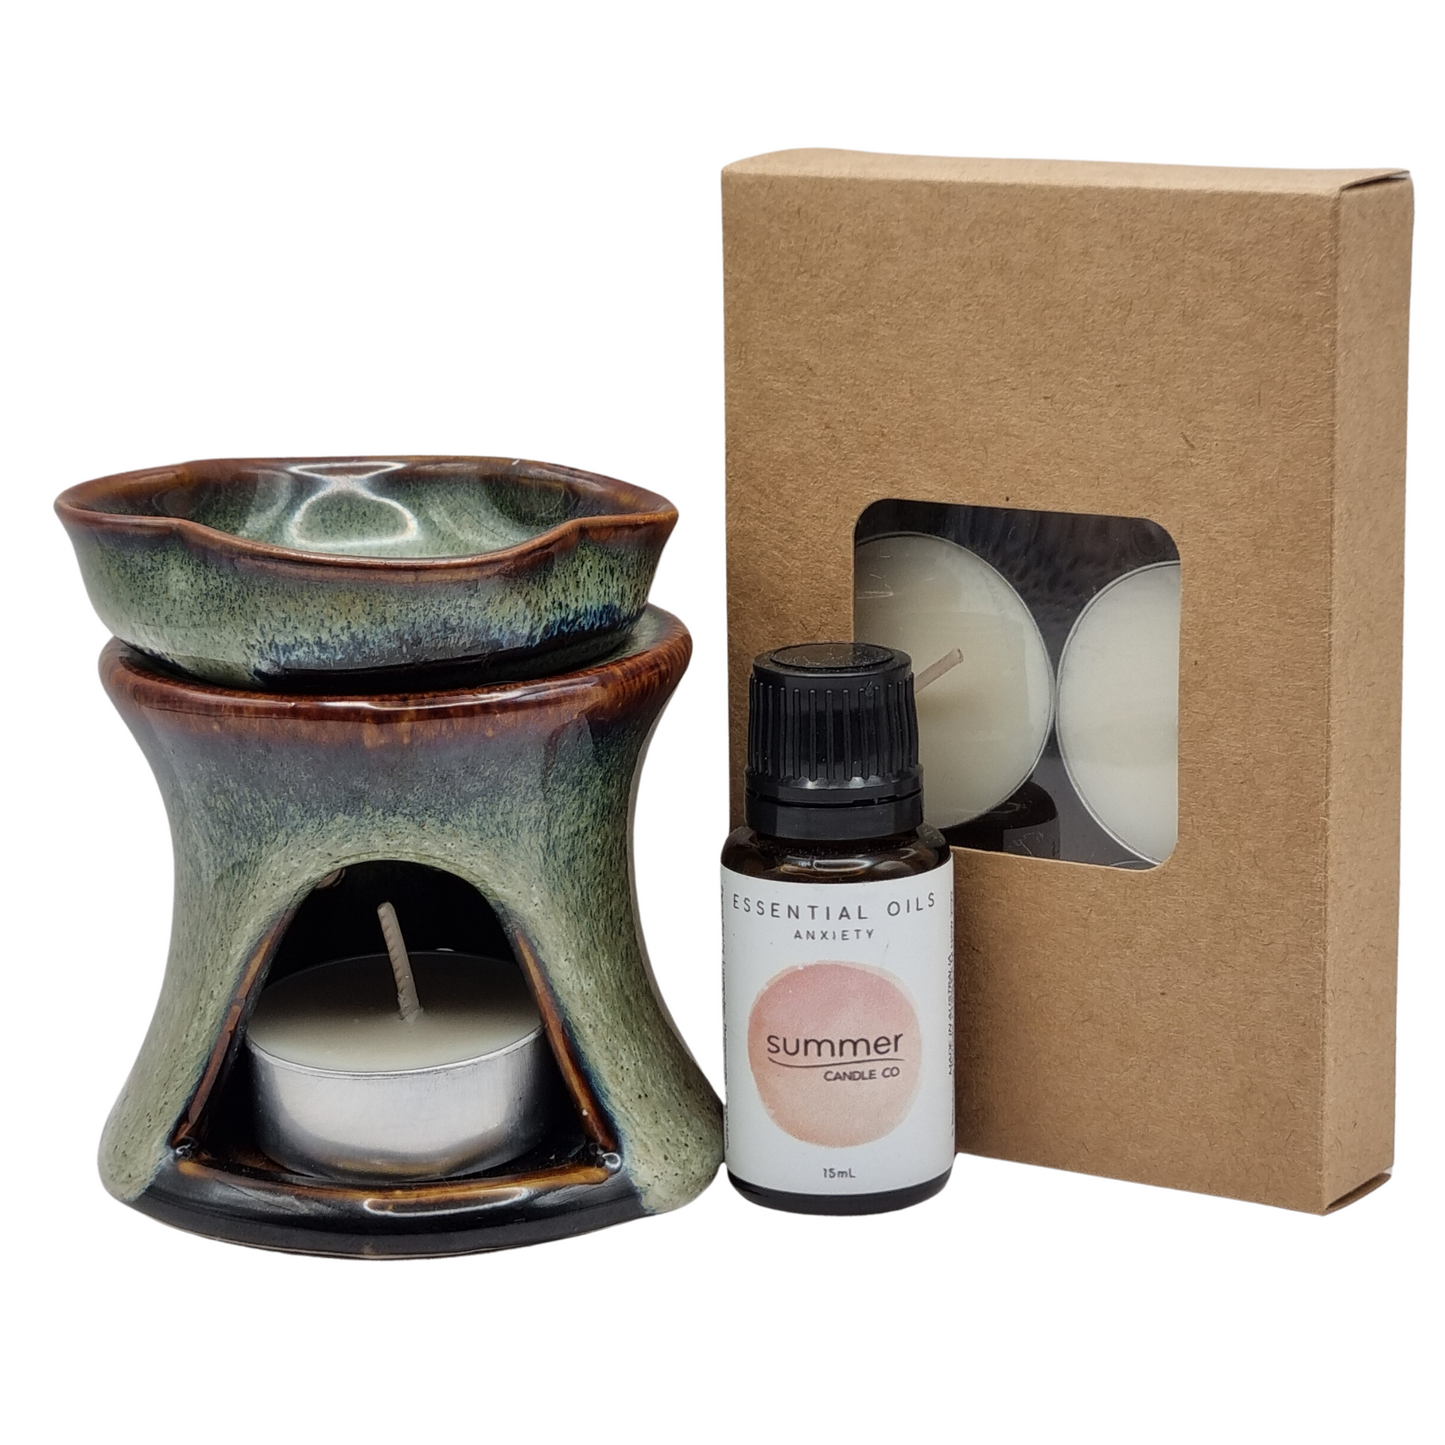 Bundle Pack Ceramic Green Oil Burner with Anxiety Essential Oil and 6 pack of Tealights